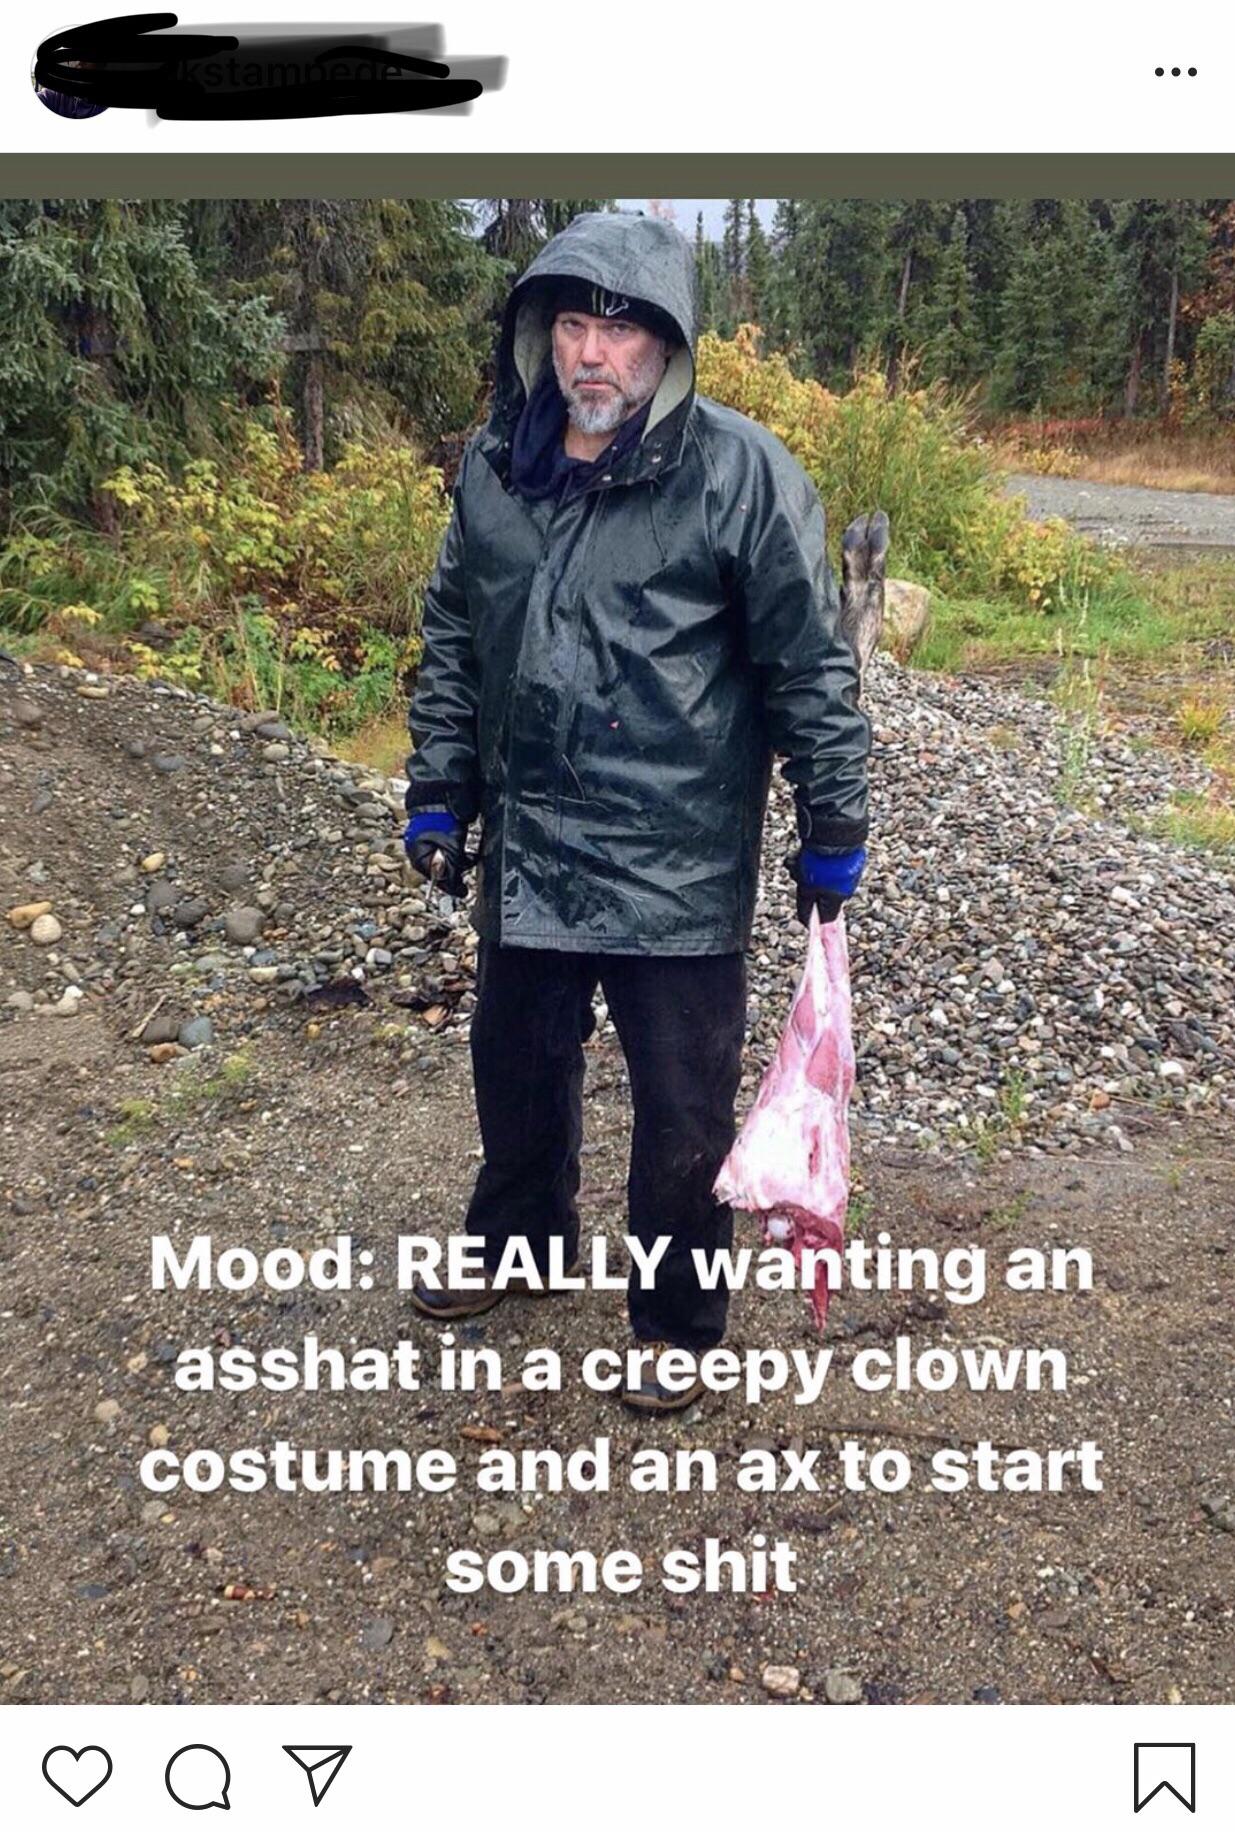 tree - Mood Really wanting an asshat in a creepy clown costume and an ax to start some shit ov